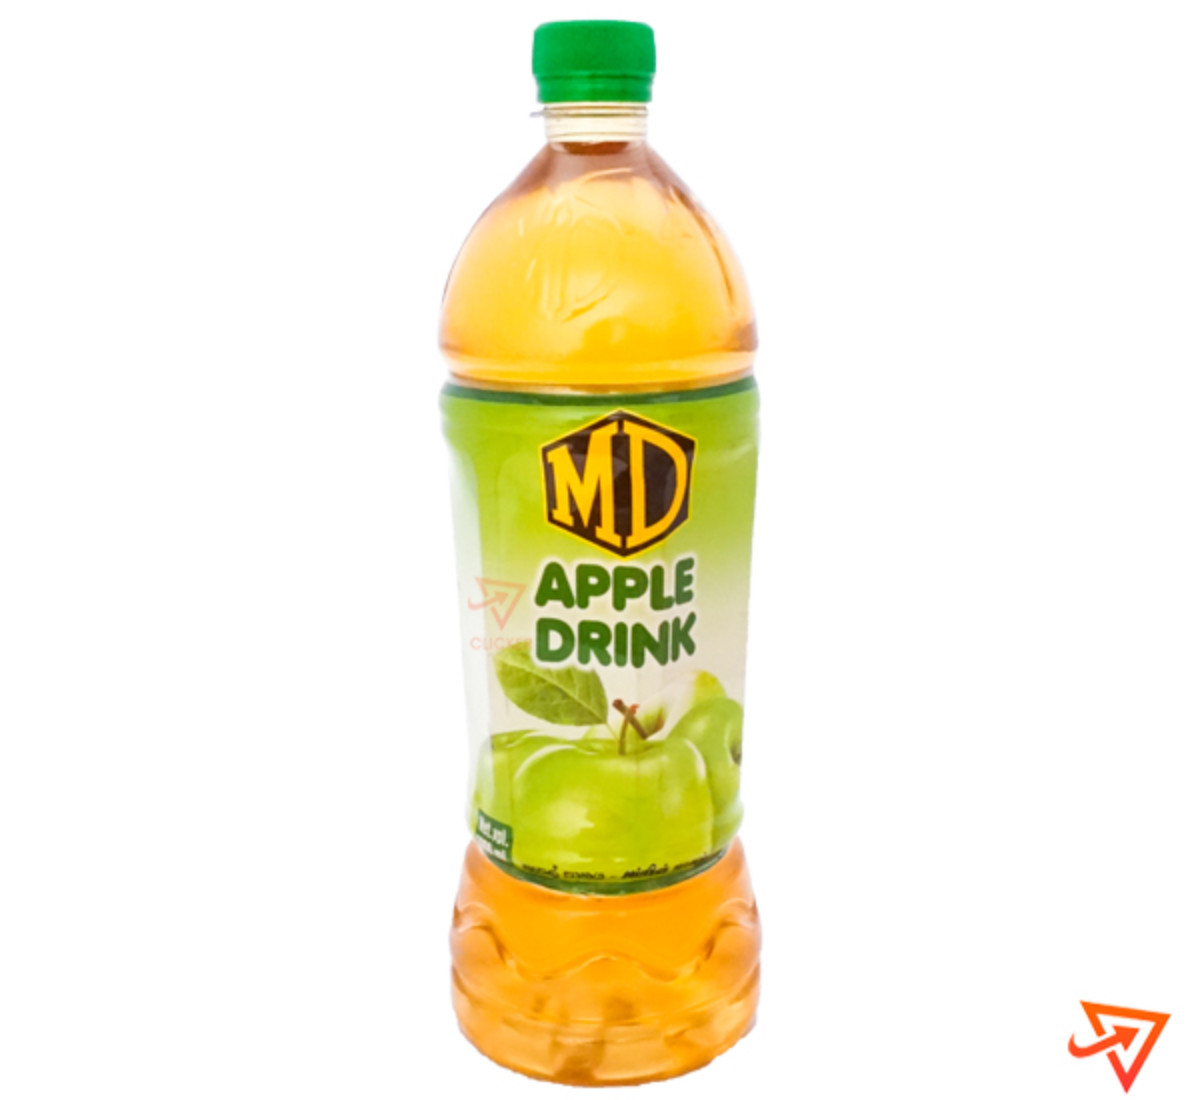 Clicker product 1000ml MD apple drink 1189